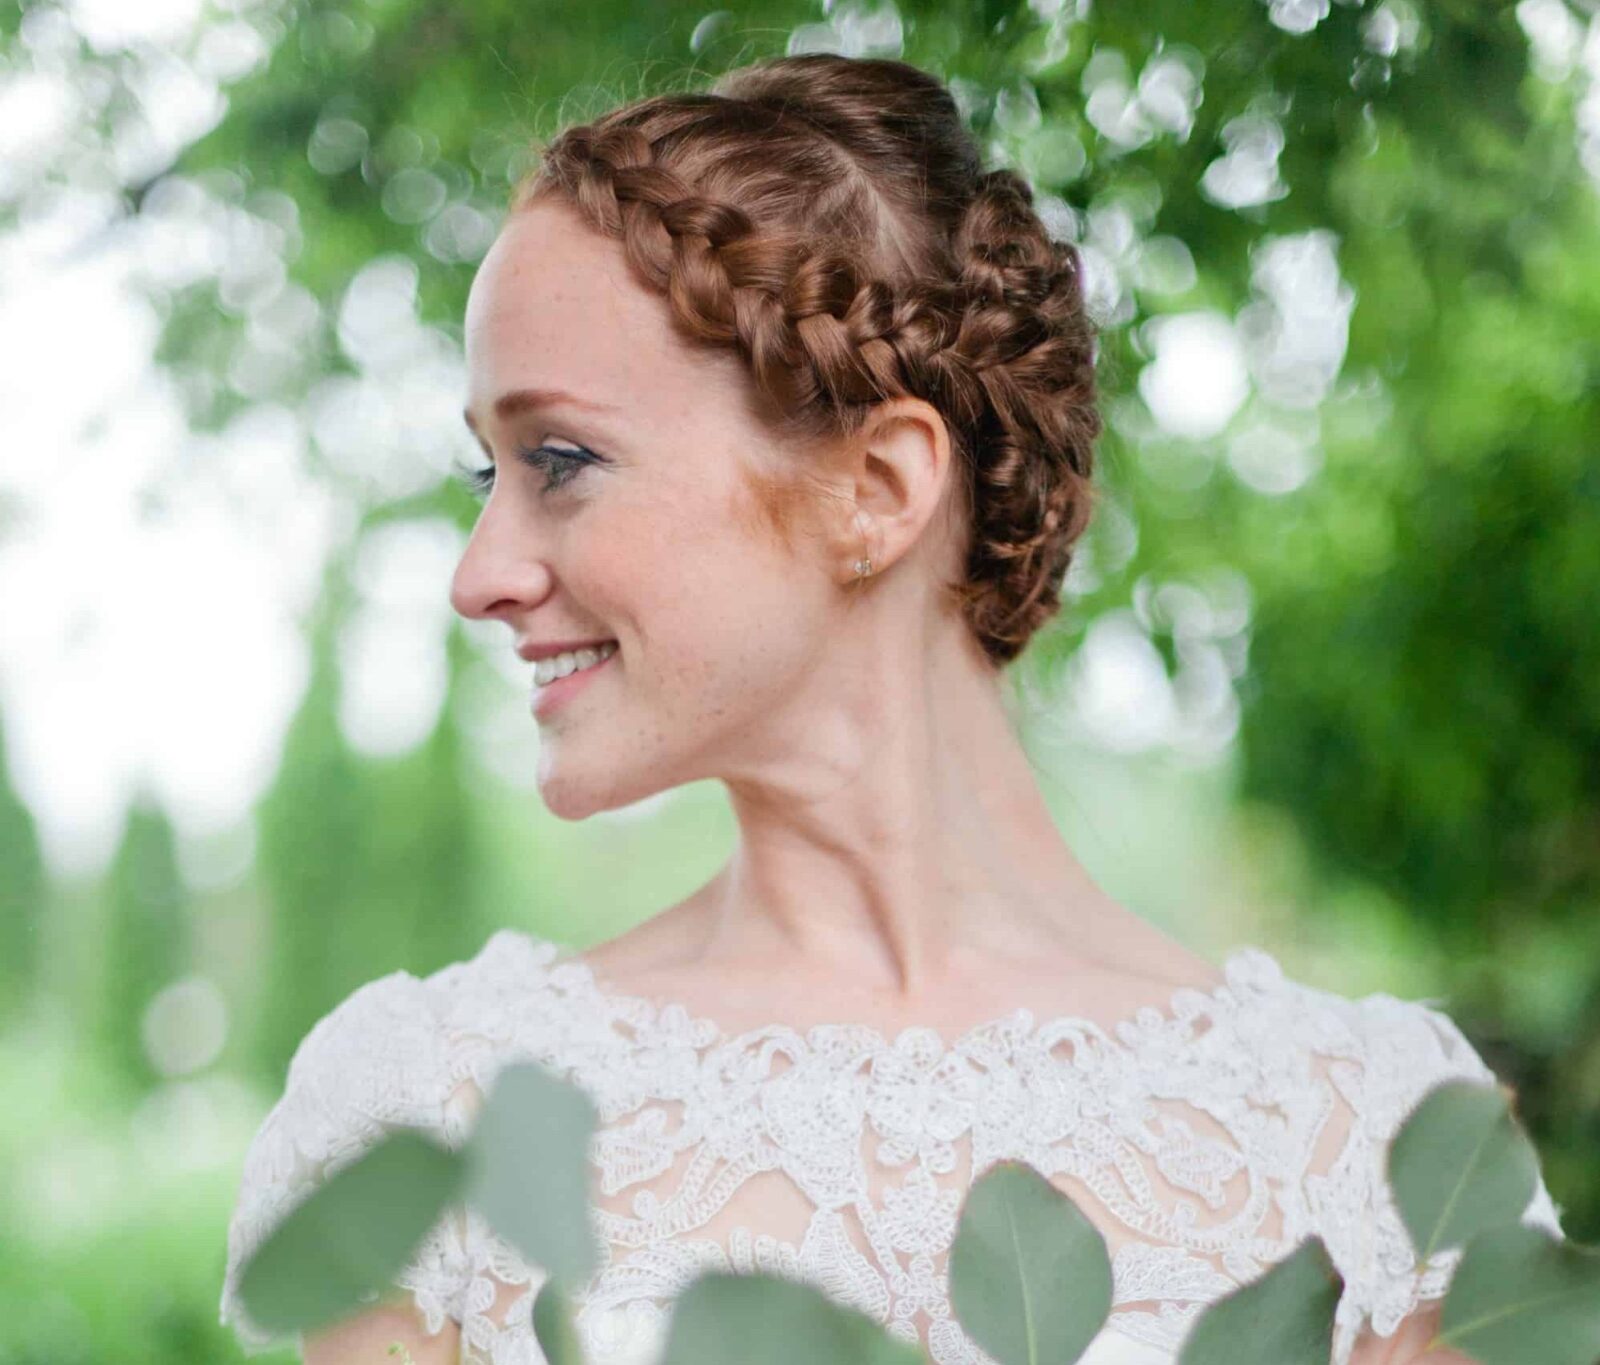 5 Tips on Picking the Right Makeup Artist for Redhead Brides